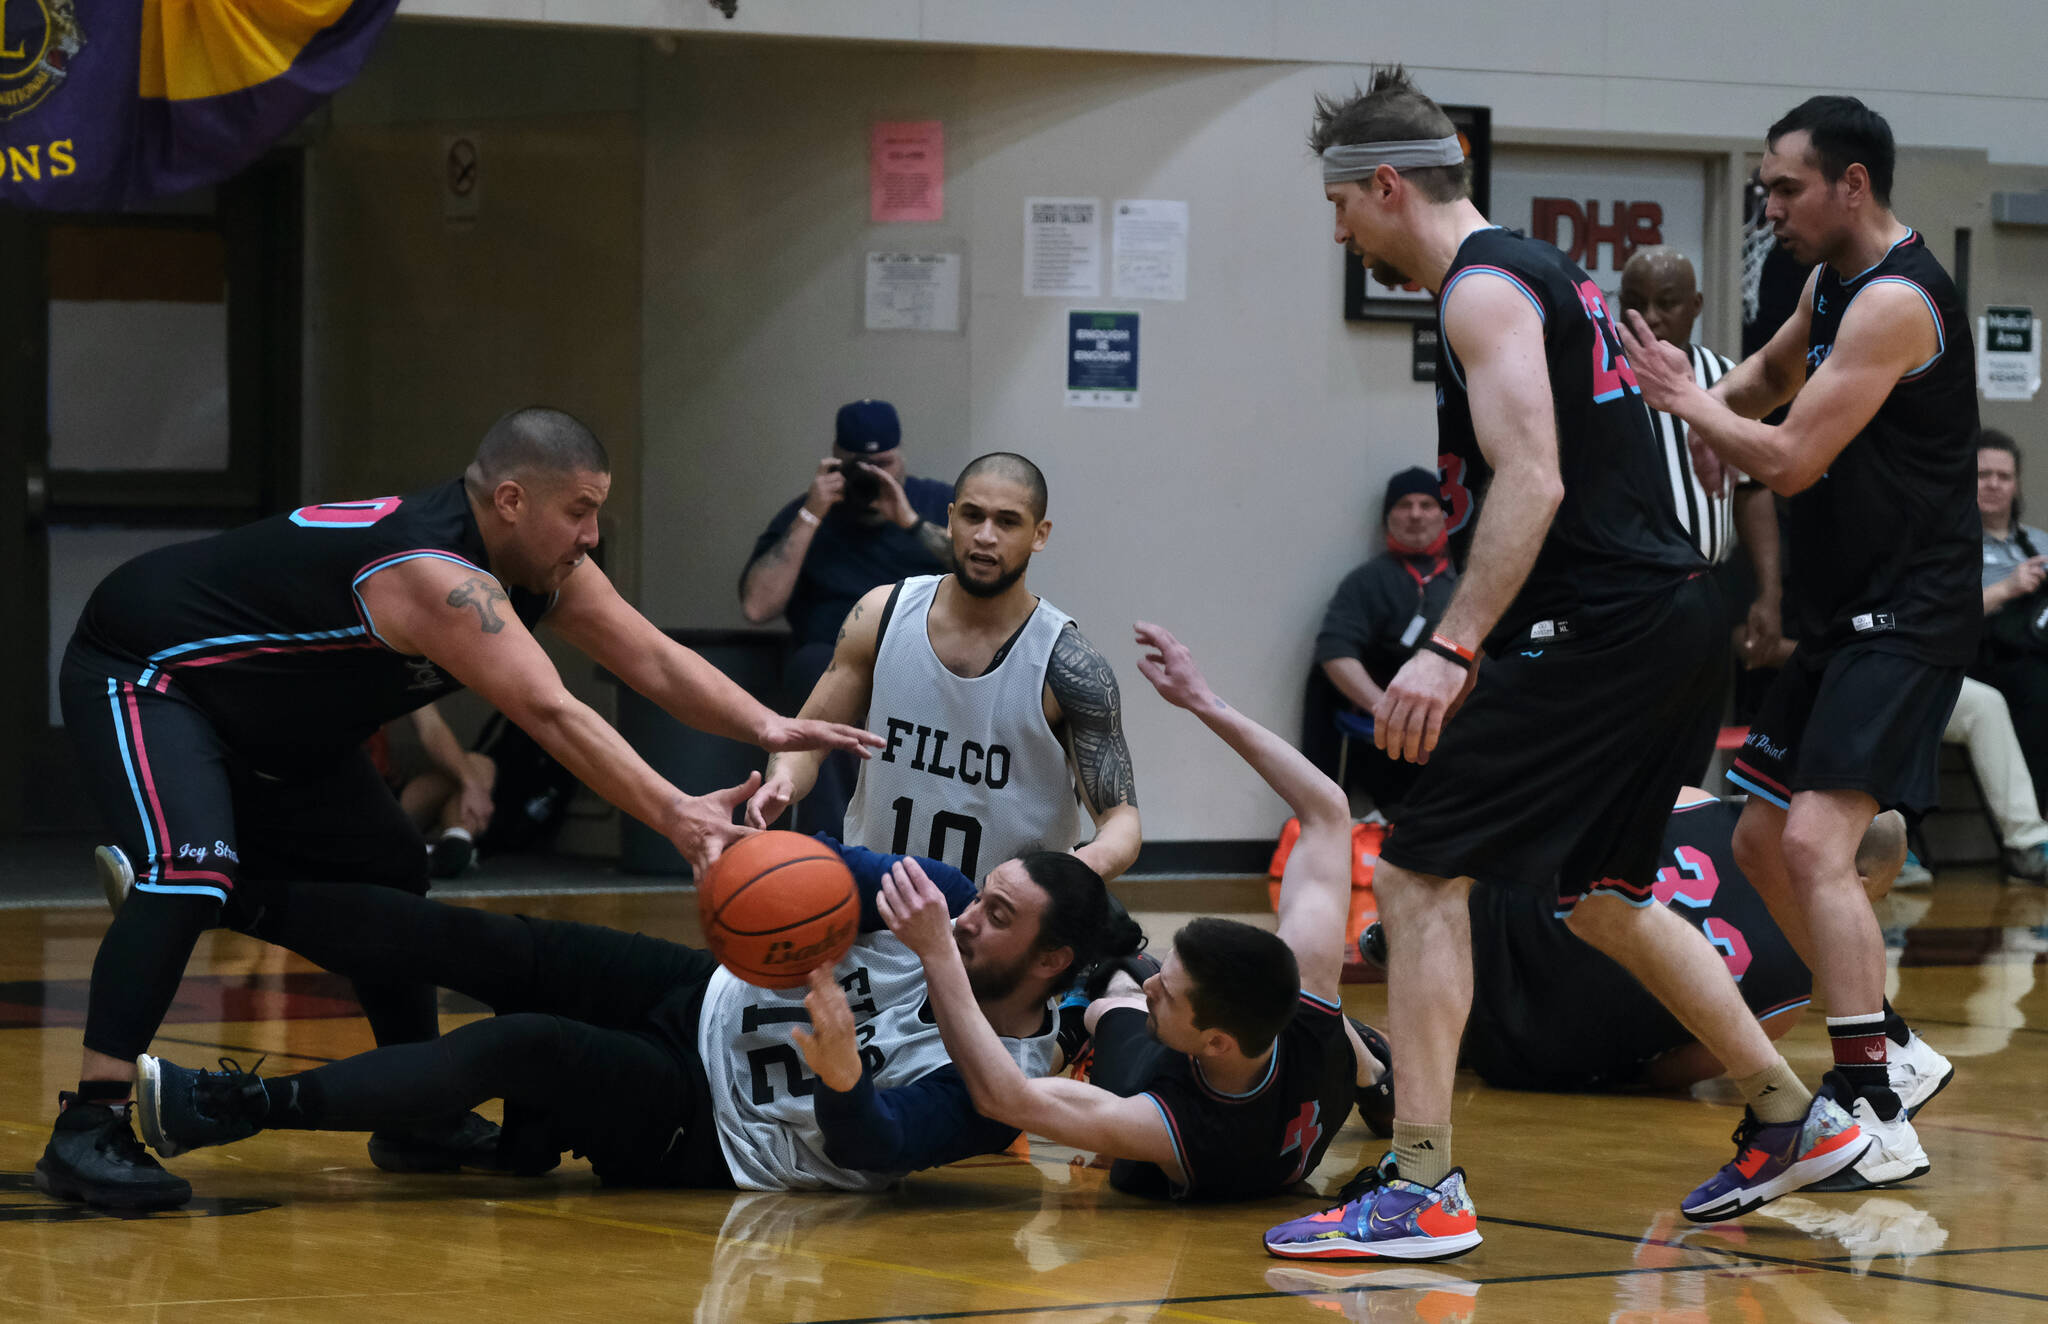 Hoonah and Filcom players battle for a loose ball during C Bracket action in the Gold Medal Basketball Tournament, Monday, March 20, at Juneau-Douglas High School: Yadaa.at Kalé. (Klas Stolpe/For the Juneau Empire)